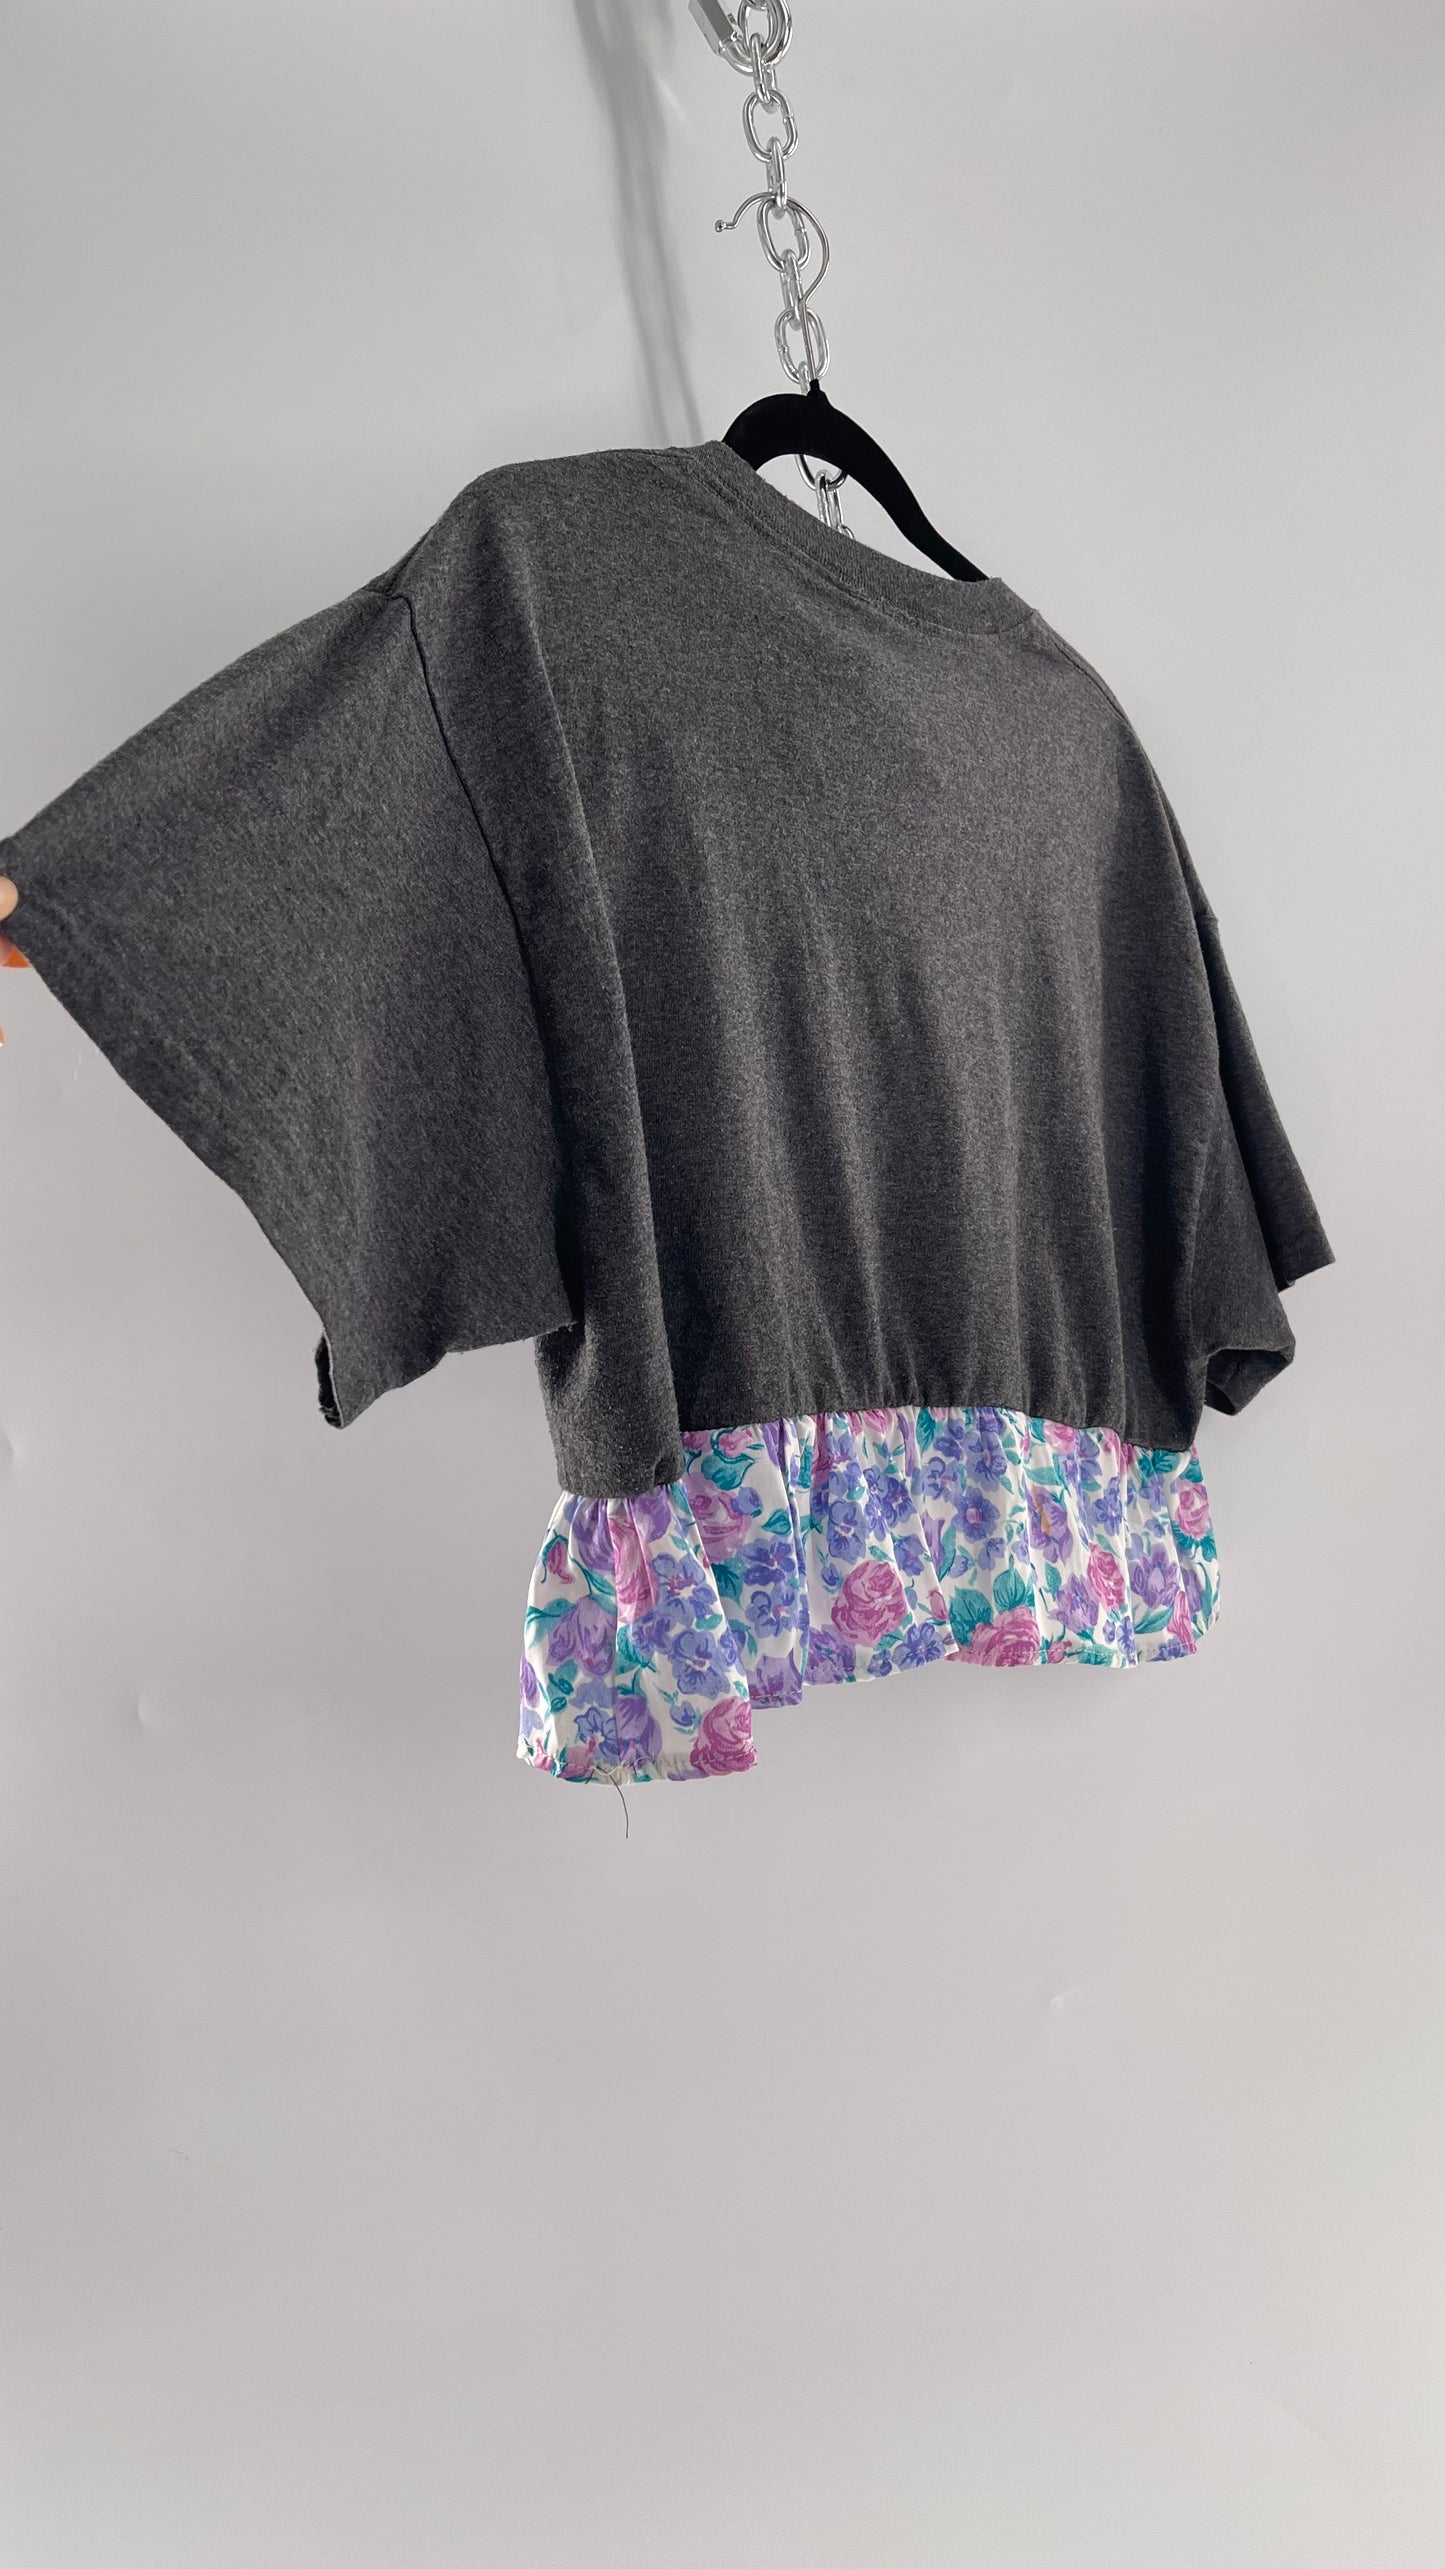 Urban Outfitters Reworked Go Vikings Sports T with Floral 80s Ruffle (M)